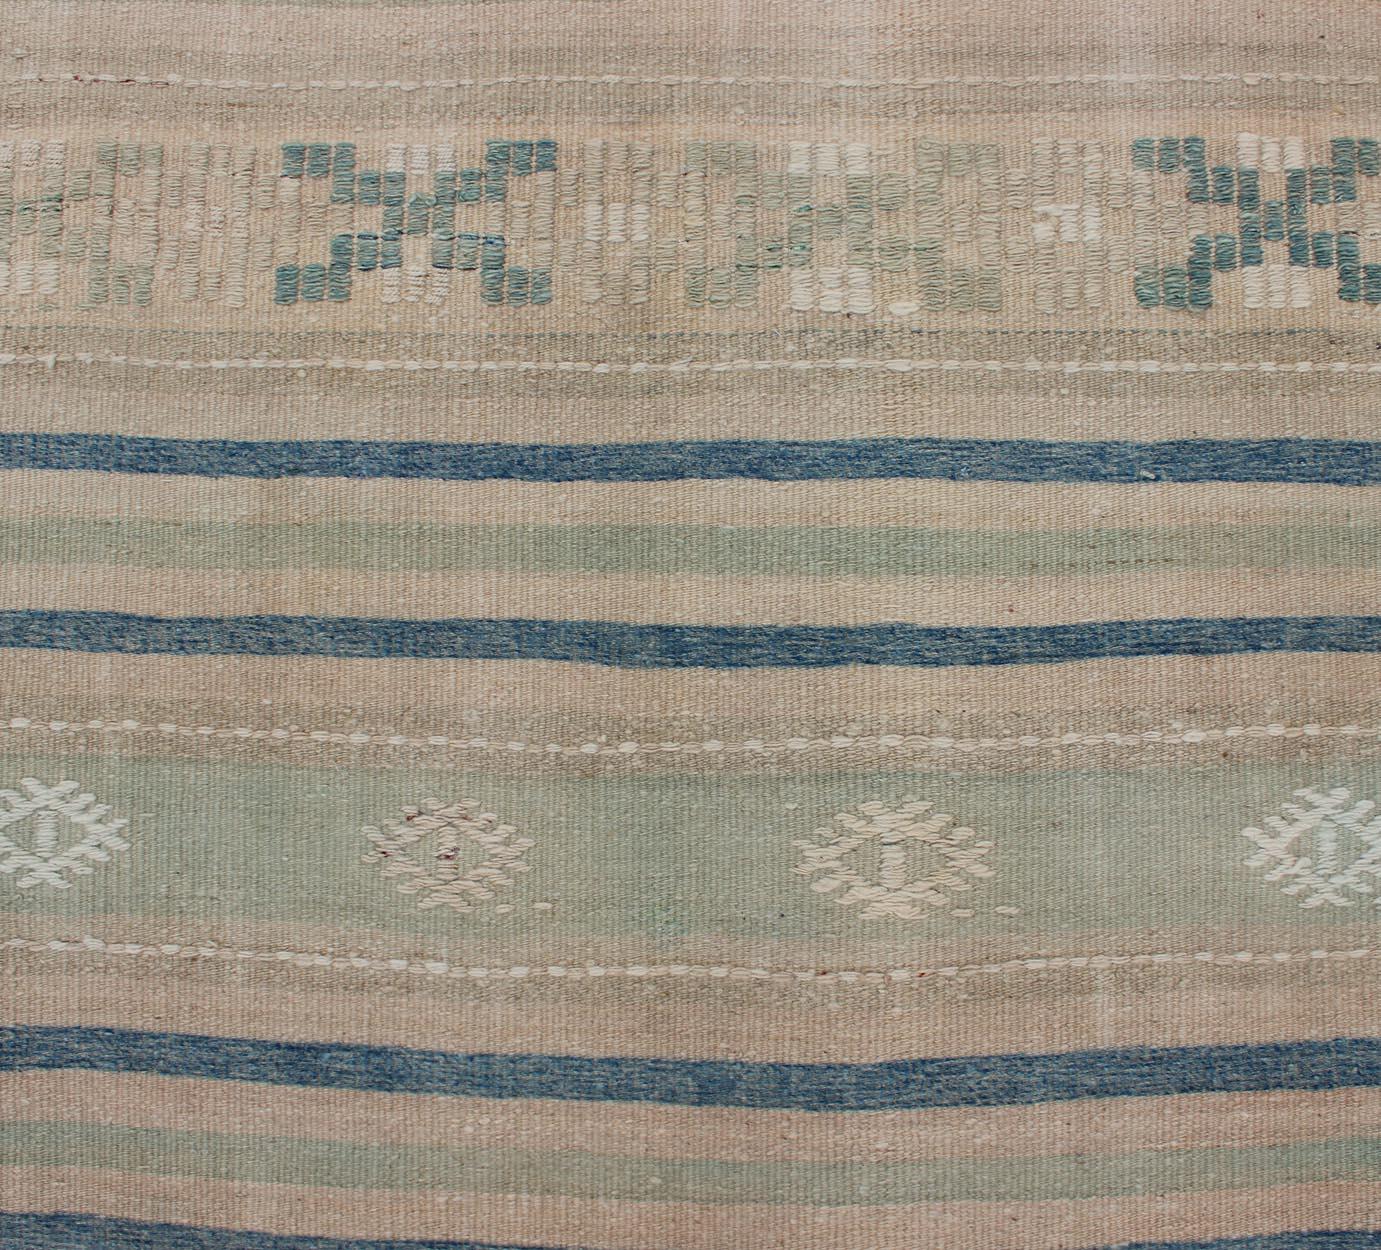 Vintage Turkish Kilim Runner with Stripes in Blue, Gray and Brown Shades In Good Condition For Sale In Atlanta, GA